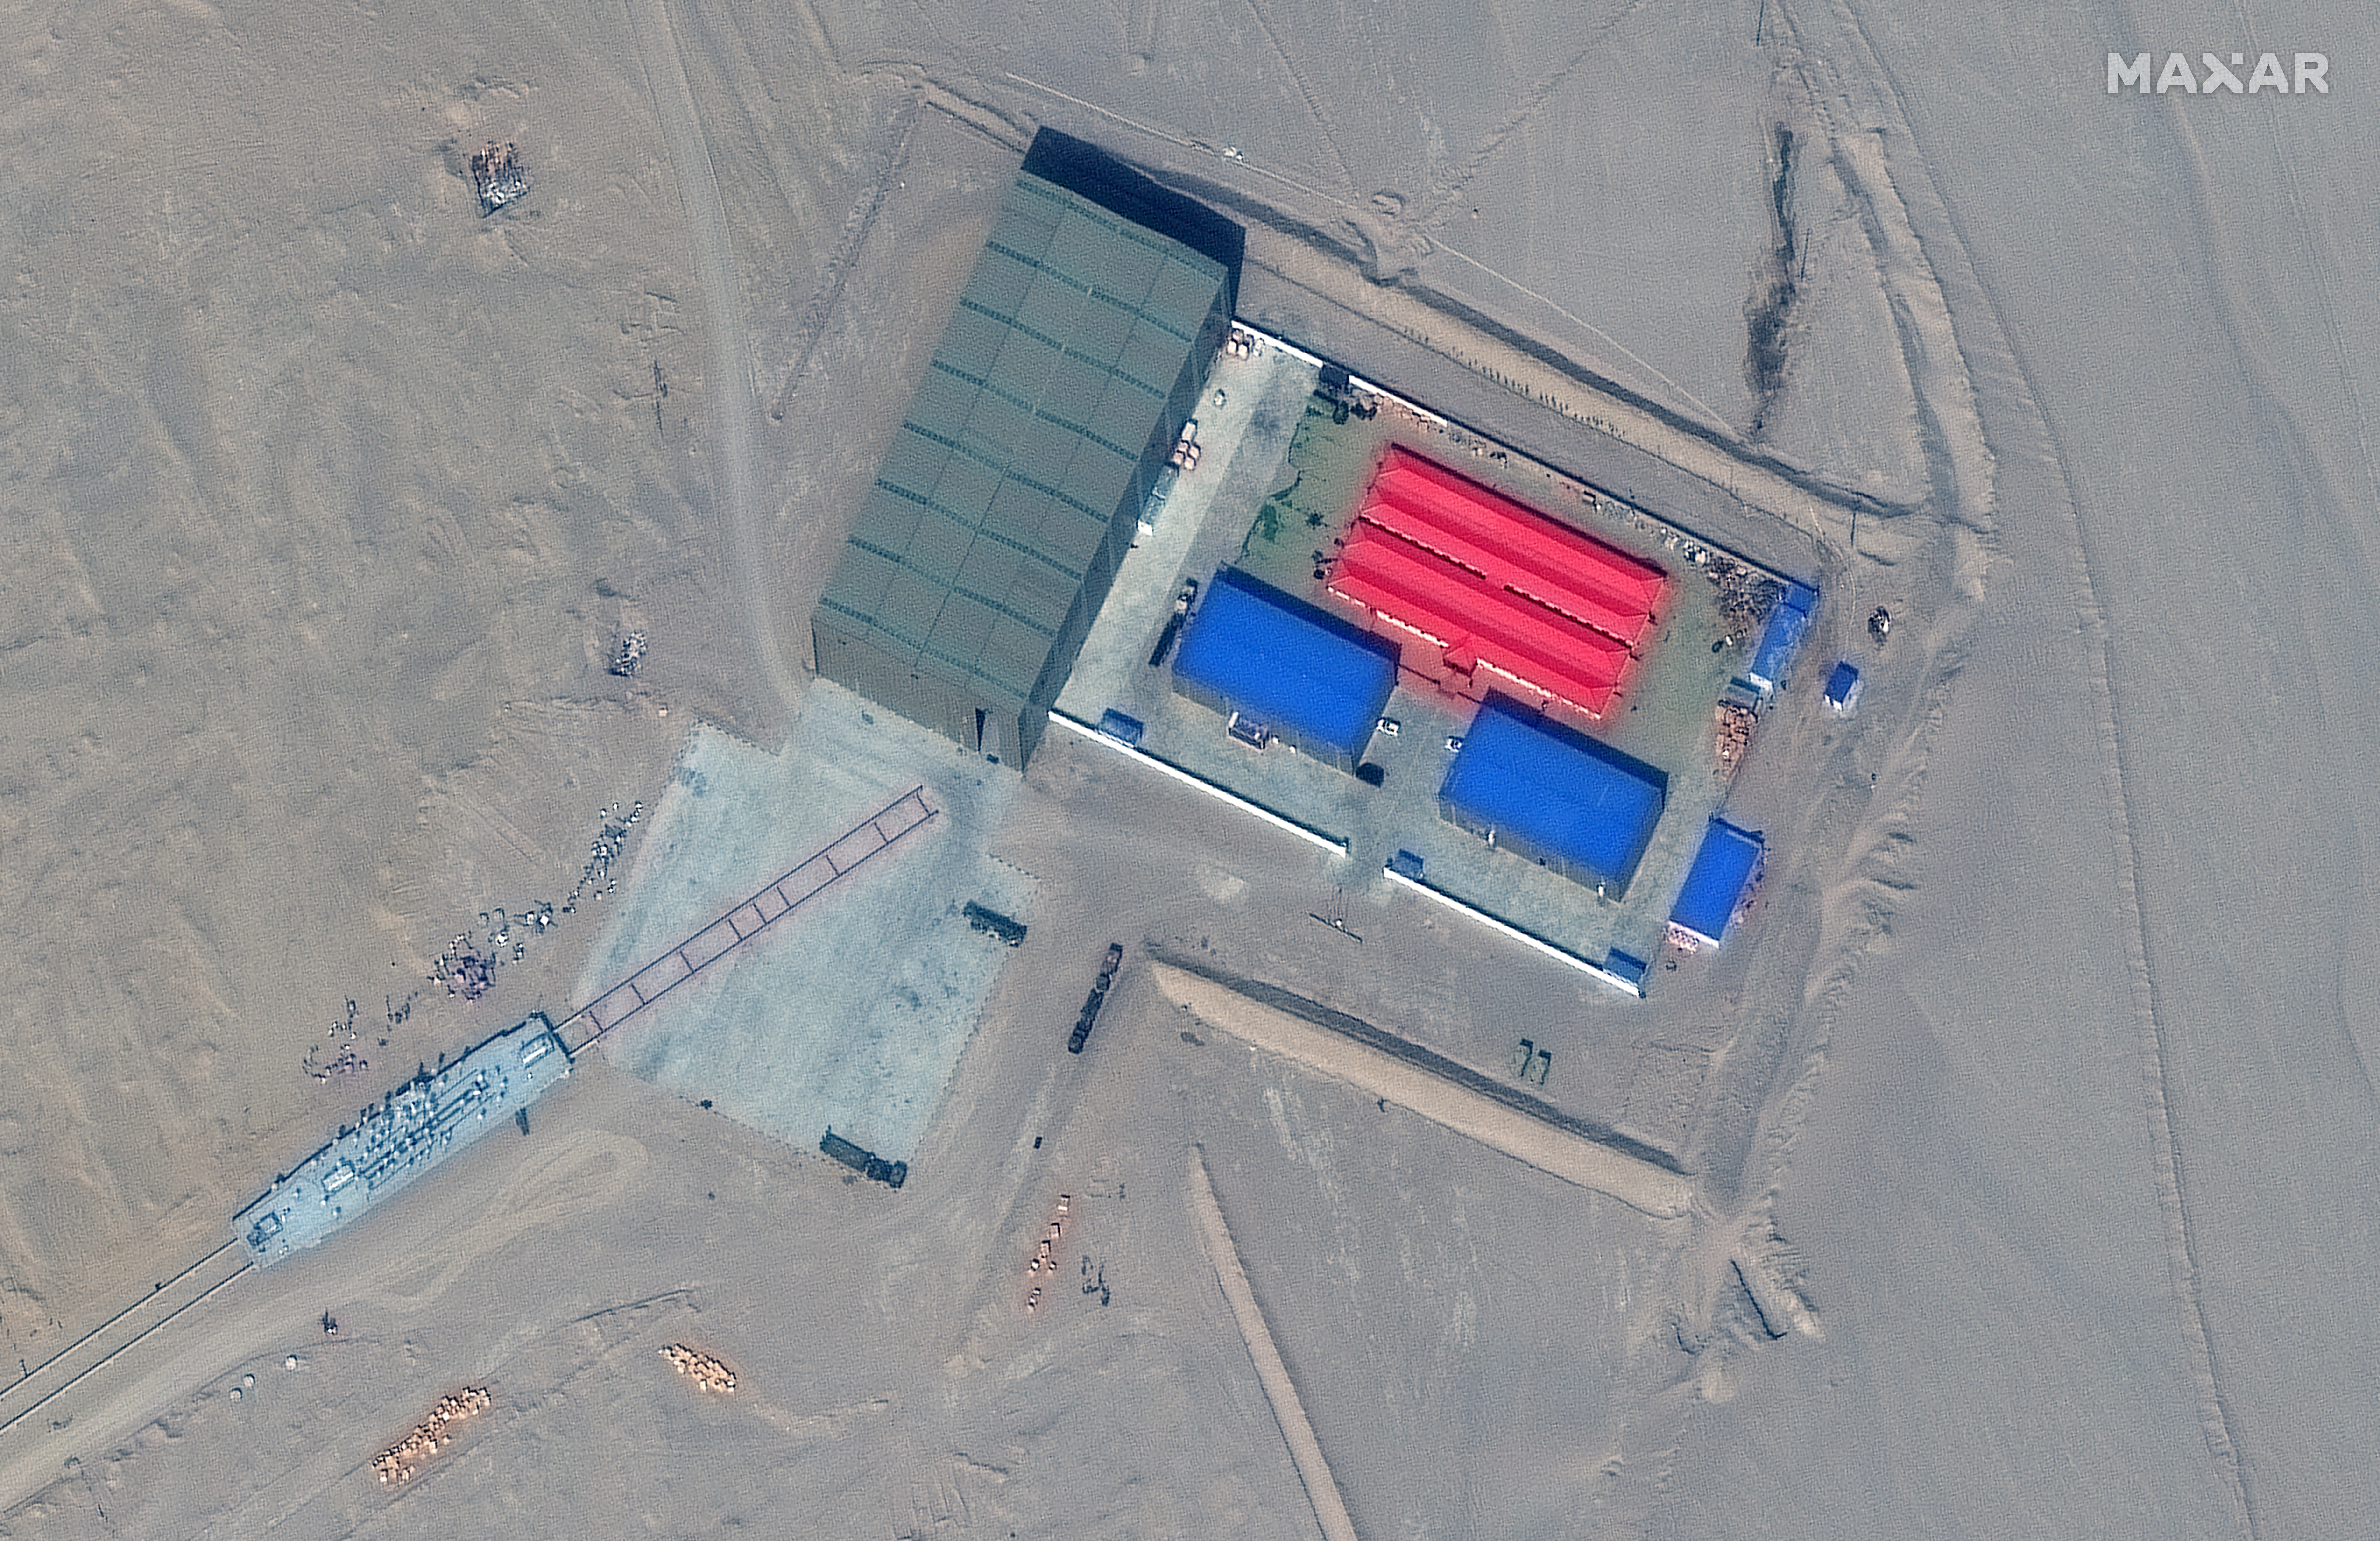 Maxar satellite image shows a rail terminus and target storage building in Ruoqiang, Xinjiang, China